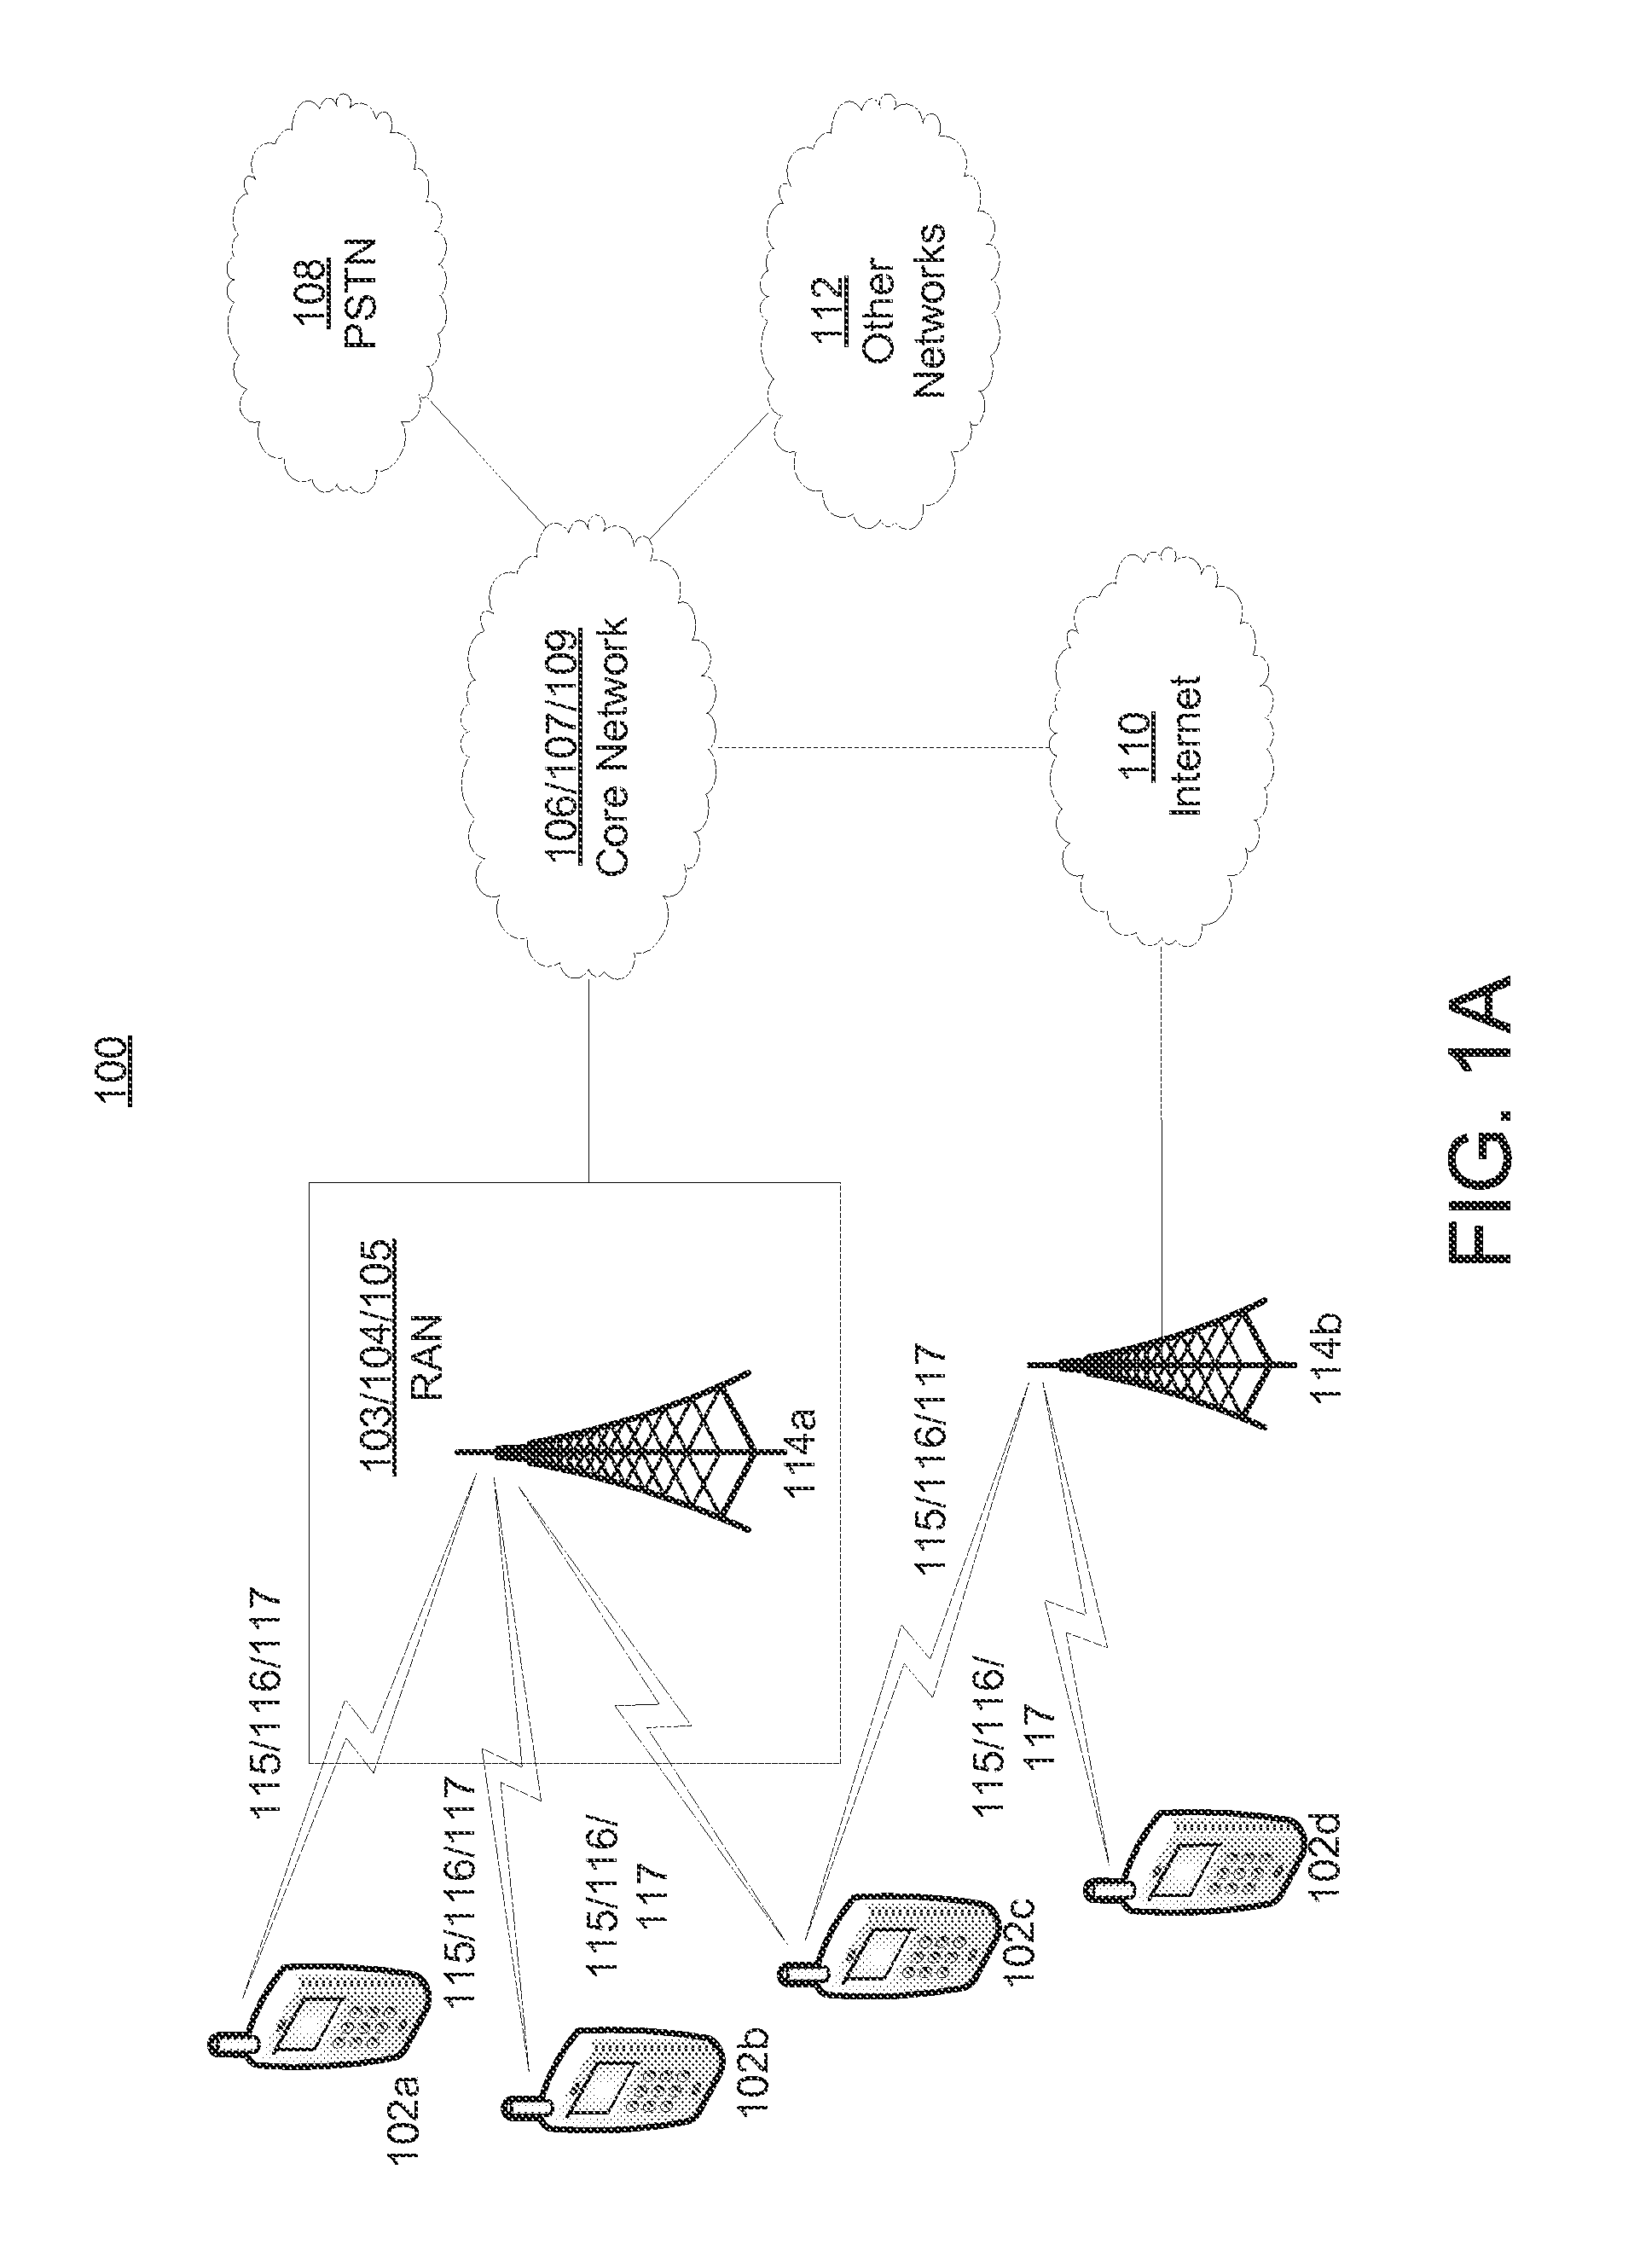 Systems and methods for extended/enhanced logical interface behavior